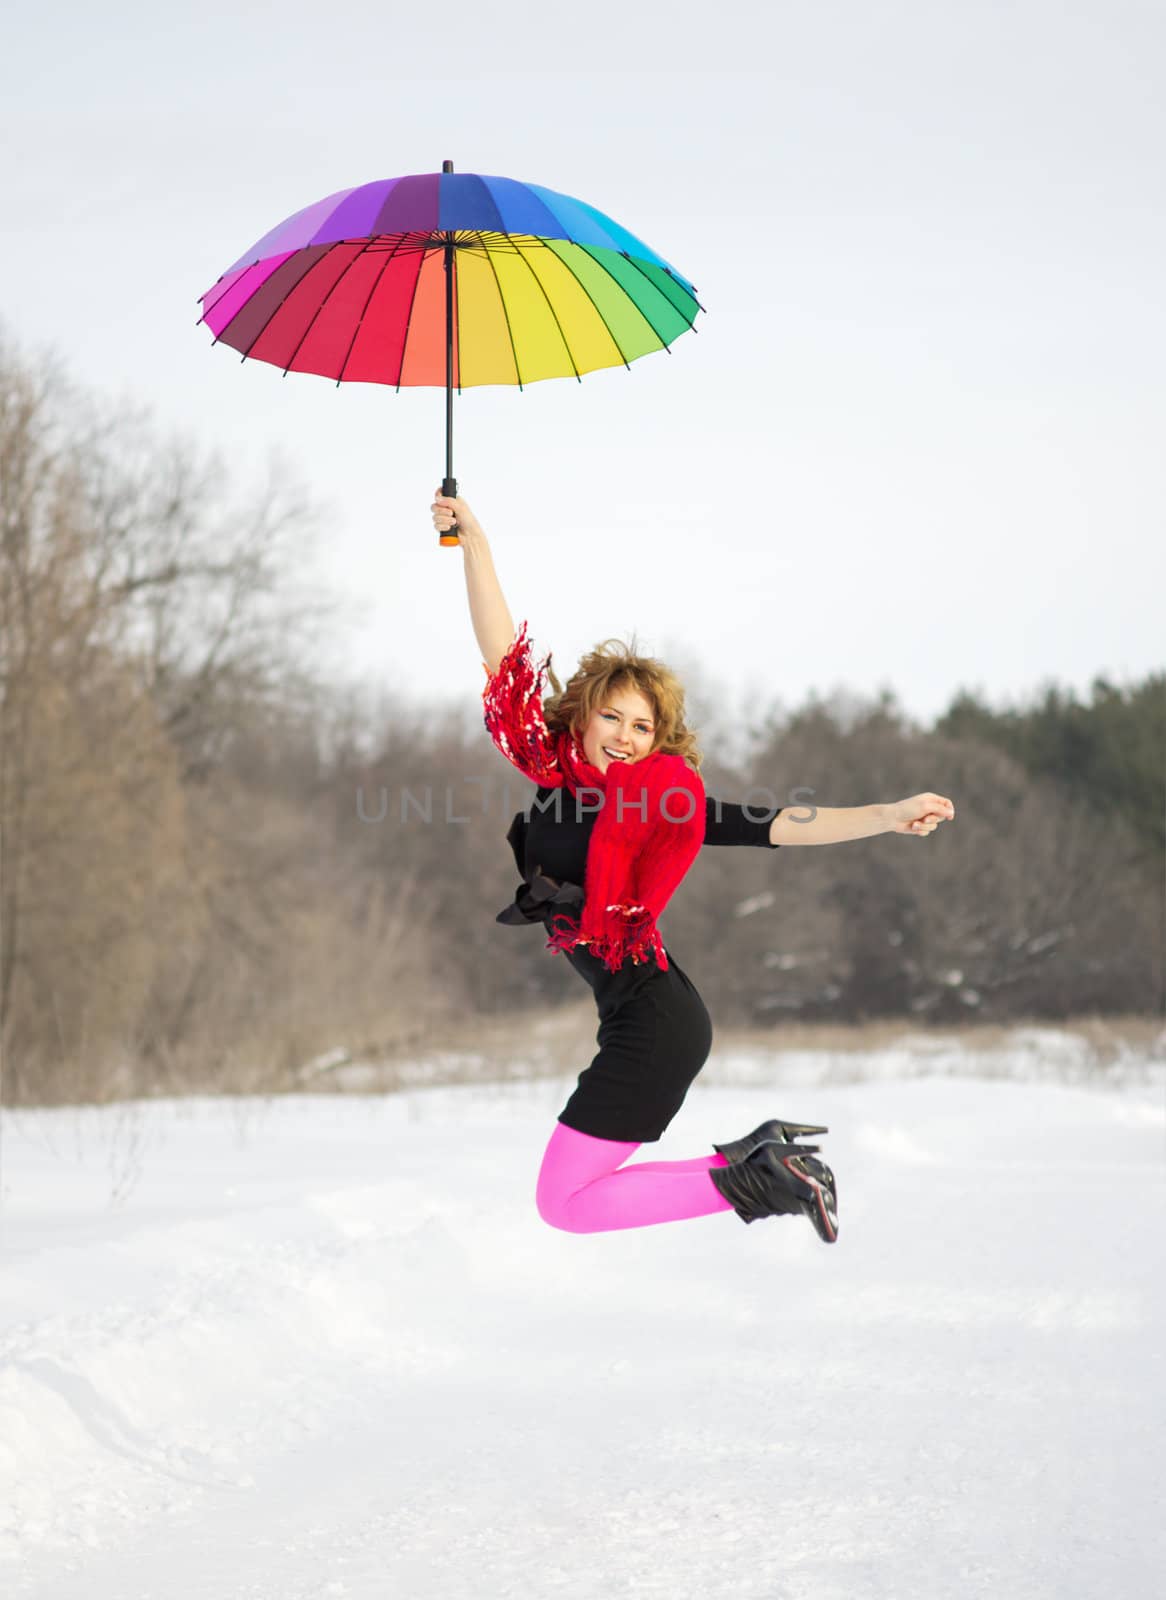 Jumpling young woman with multicolor umbrella at winter forest